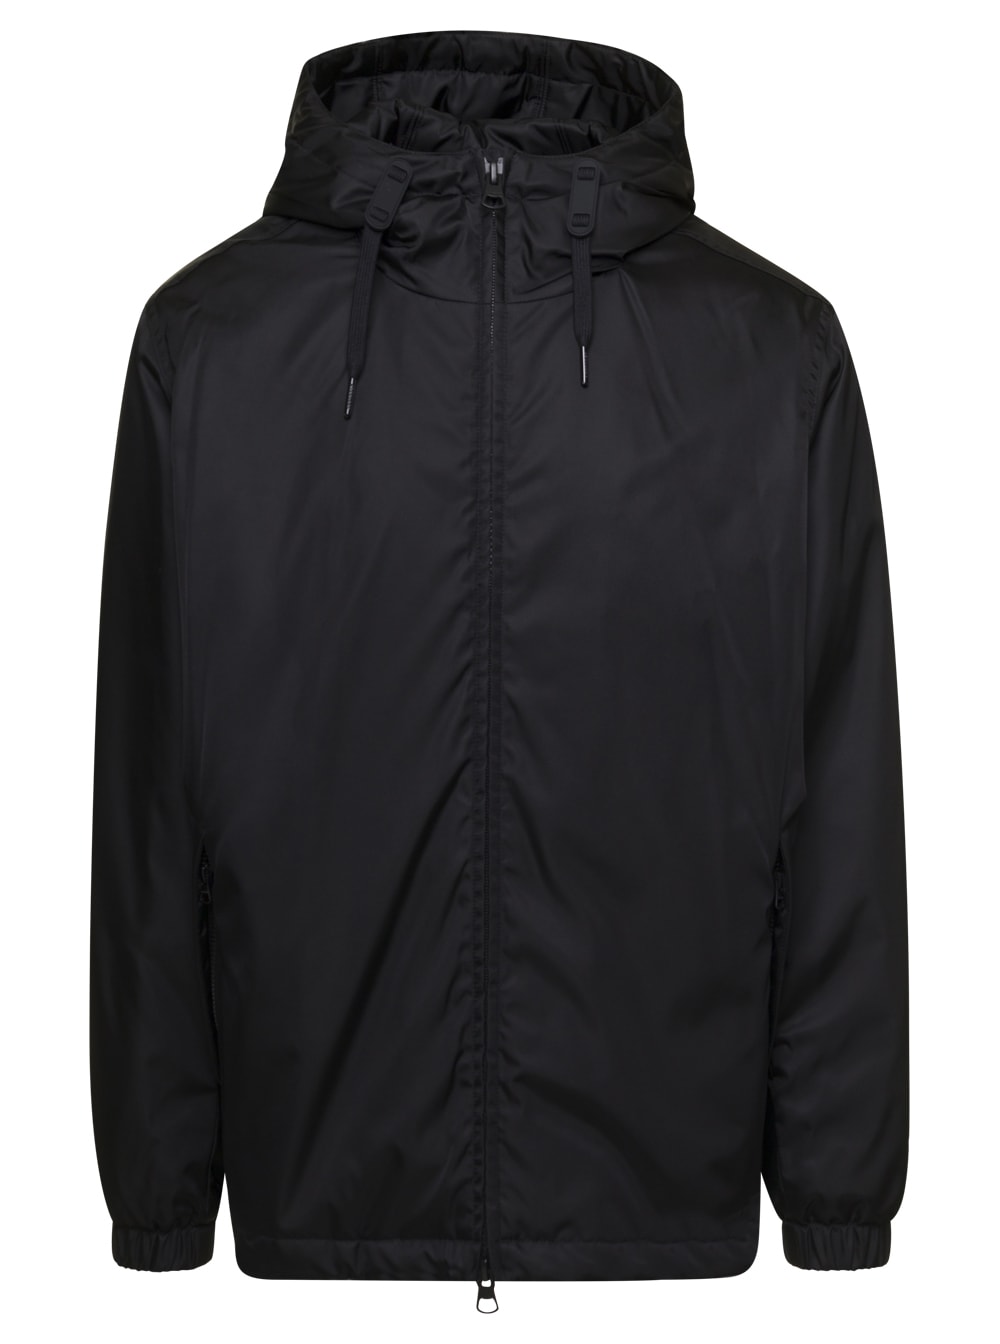 stanford Ekd Black Hooded Jacket With Equestrian Knight Print In Nylon Man Burberry